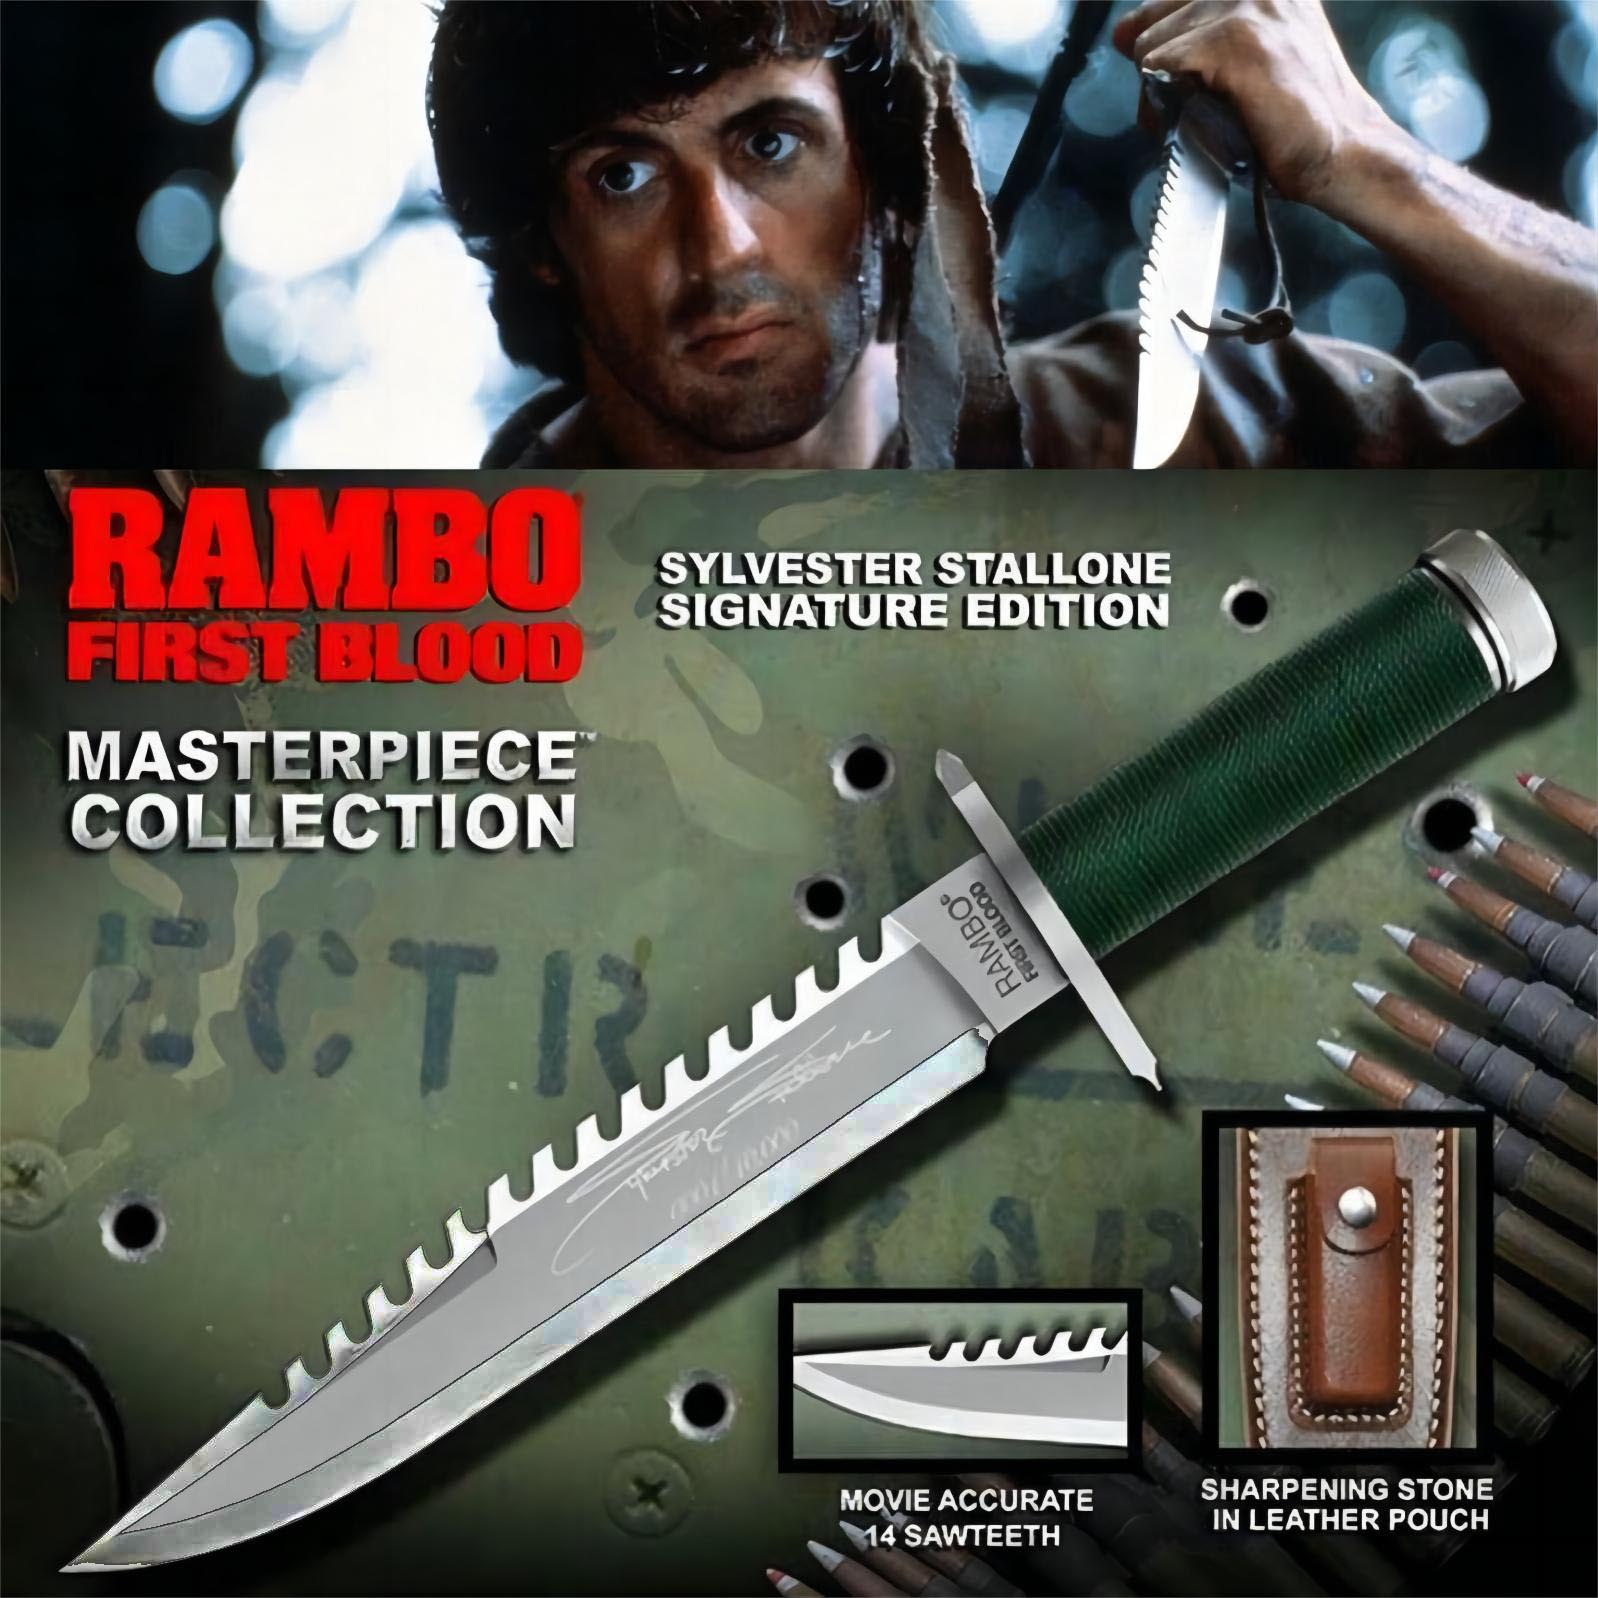 🔥Rambo's First Blood Knife Signature Masterpiece Outdoor Gear (limitovaná edice)